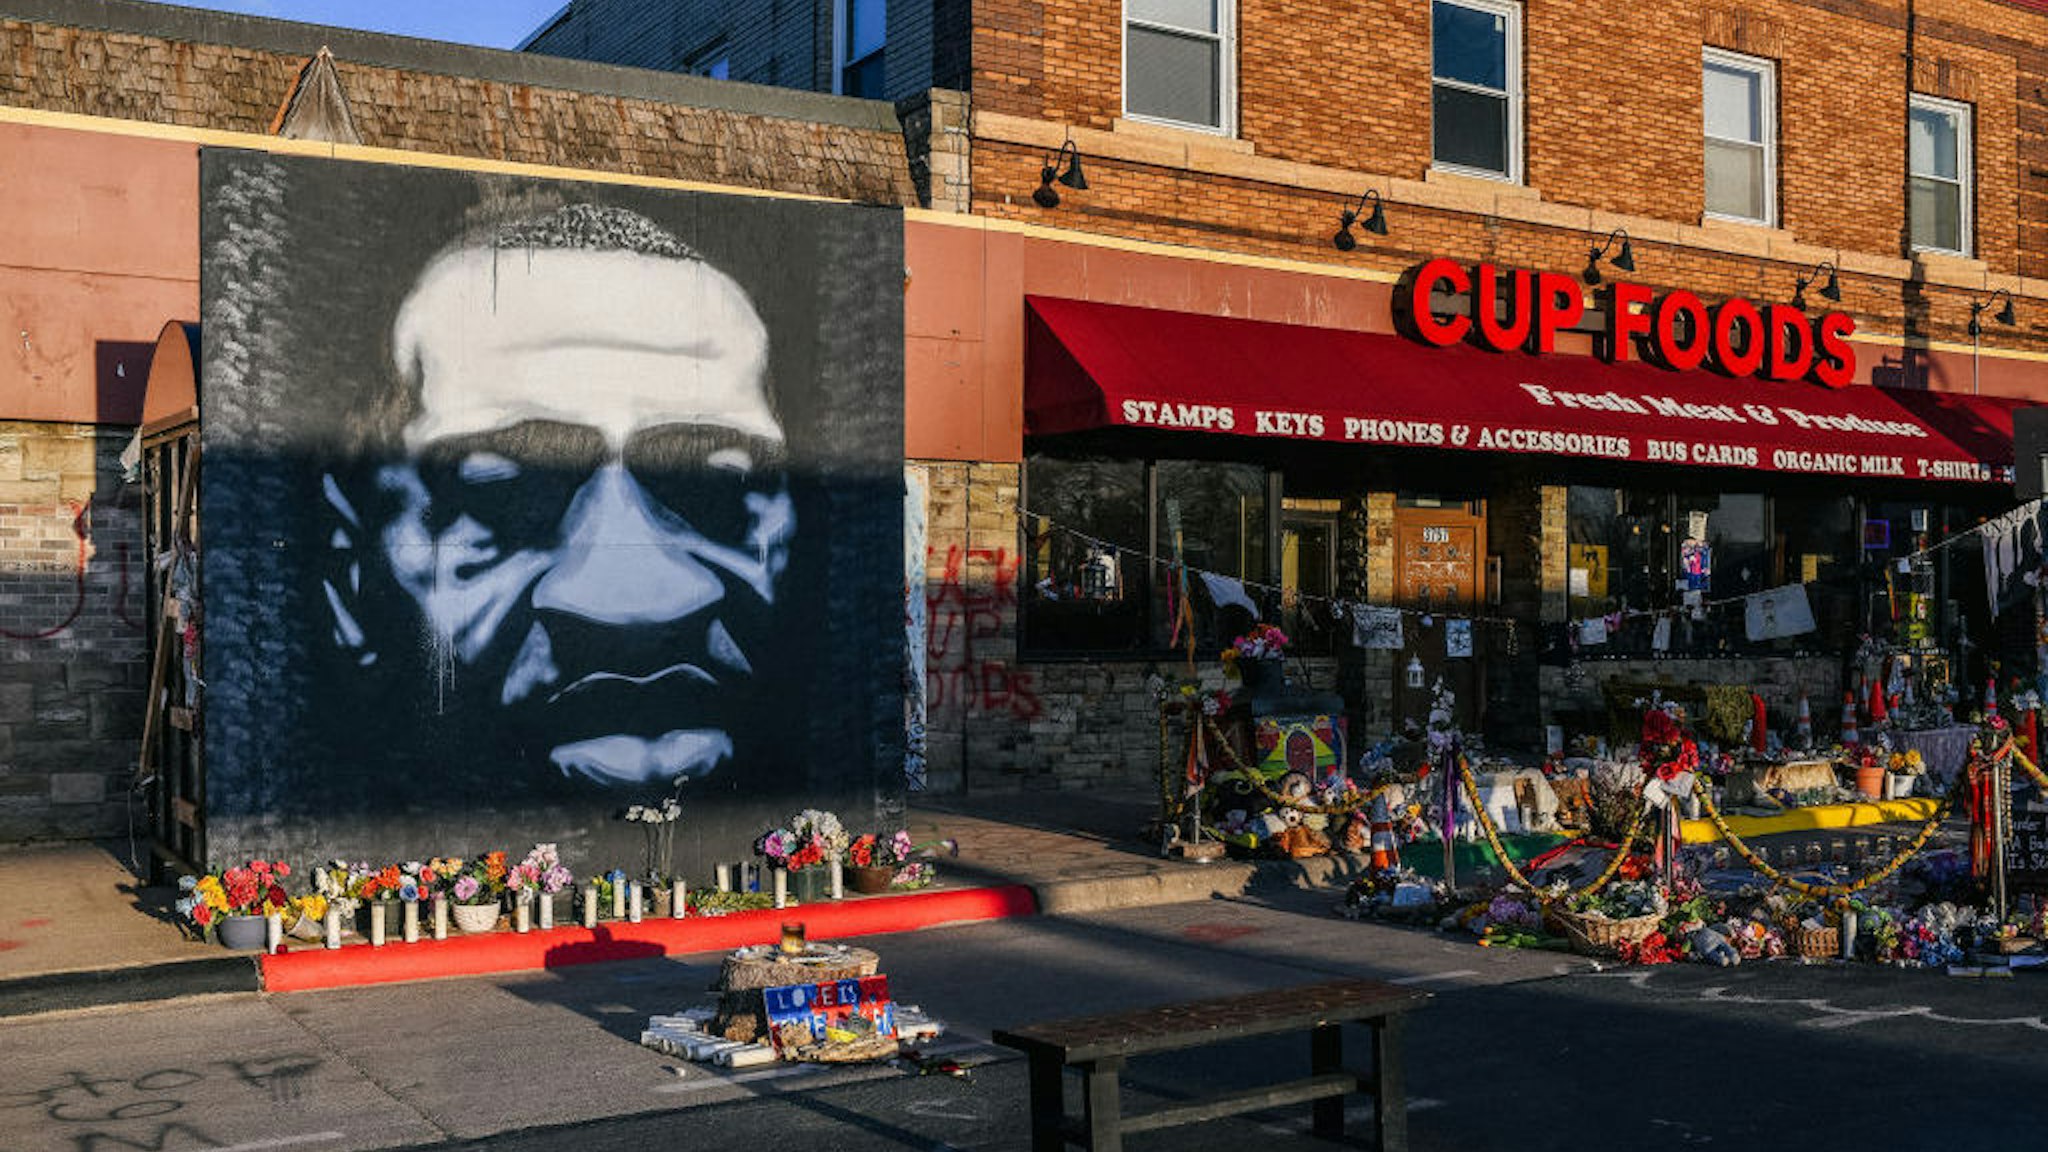 MINNEAPOLIS, MN - MARCH 31: A mural of George Floyd is shown in the intersection of 38th St &amp; Chicago Ave on March 31, 2021 in Minneapolis, Minnesota. Community members continue preparations during the third day in the trial of former Minneapolis police officer Derek Chauvin, who is charged with multiple counts of murder in the death of George Floyd. (Photo by Brandon Bell/Getty Images)